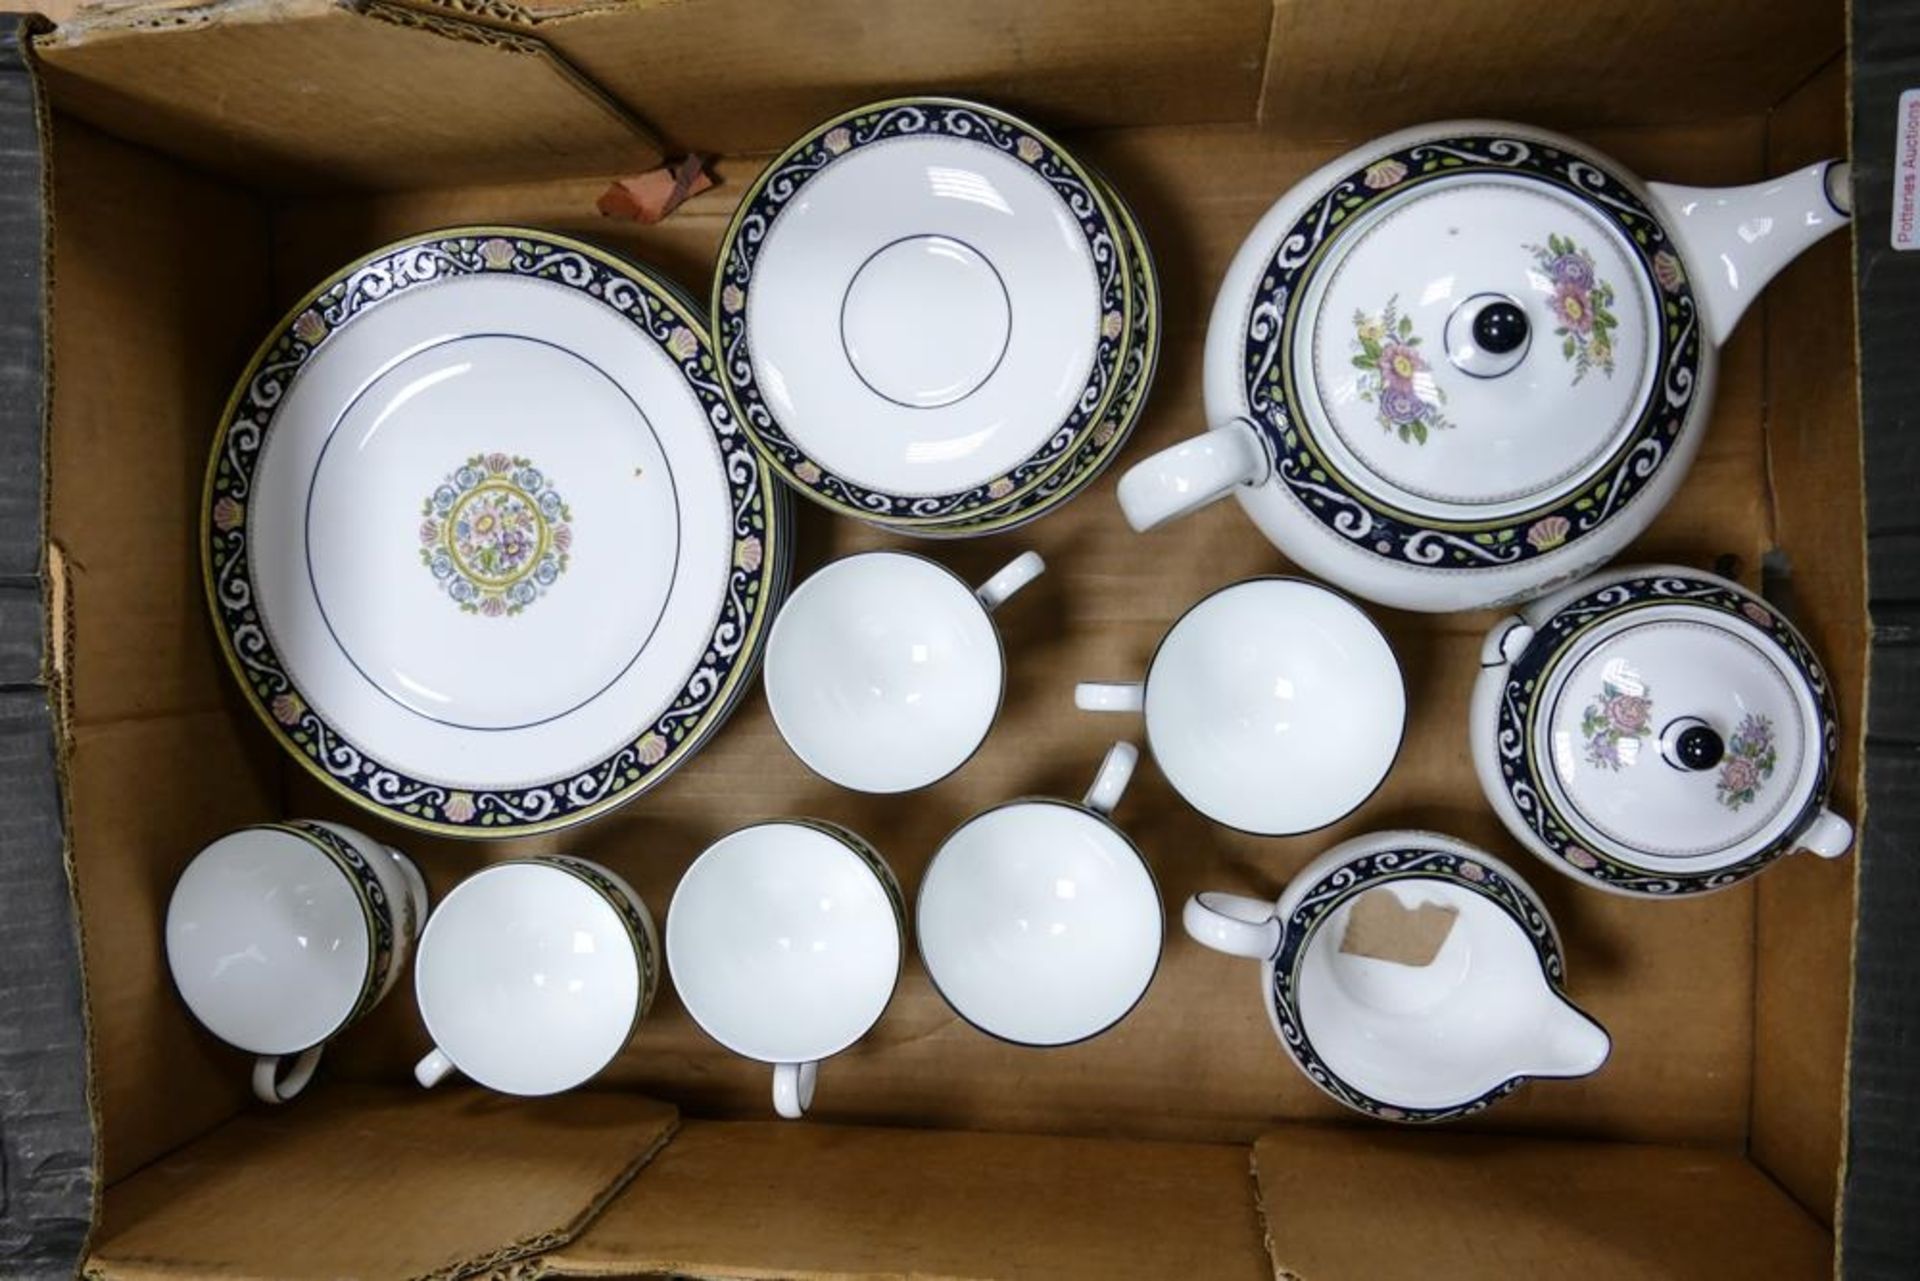 A collection of Wedgwood Runnymede patterned Cup & saucers, Salad Plates & tea service (seconds)